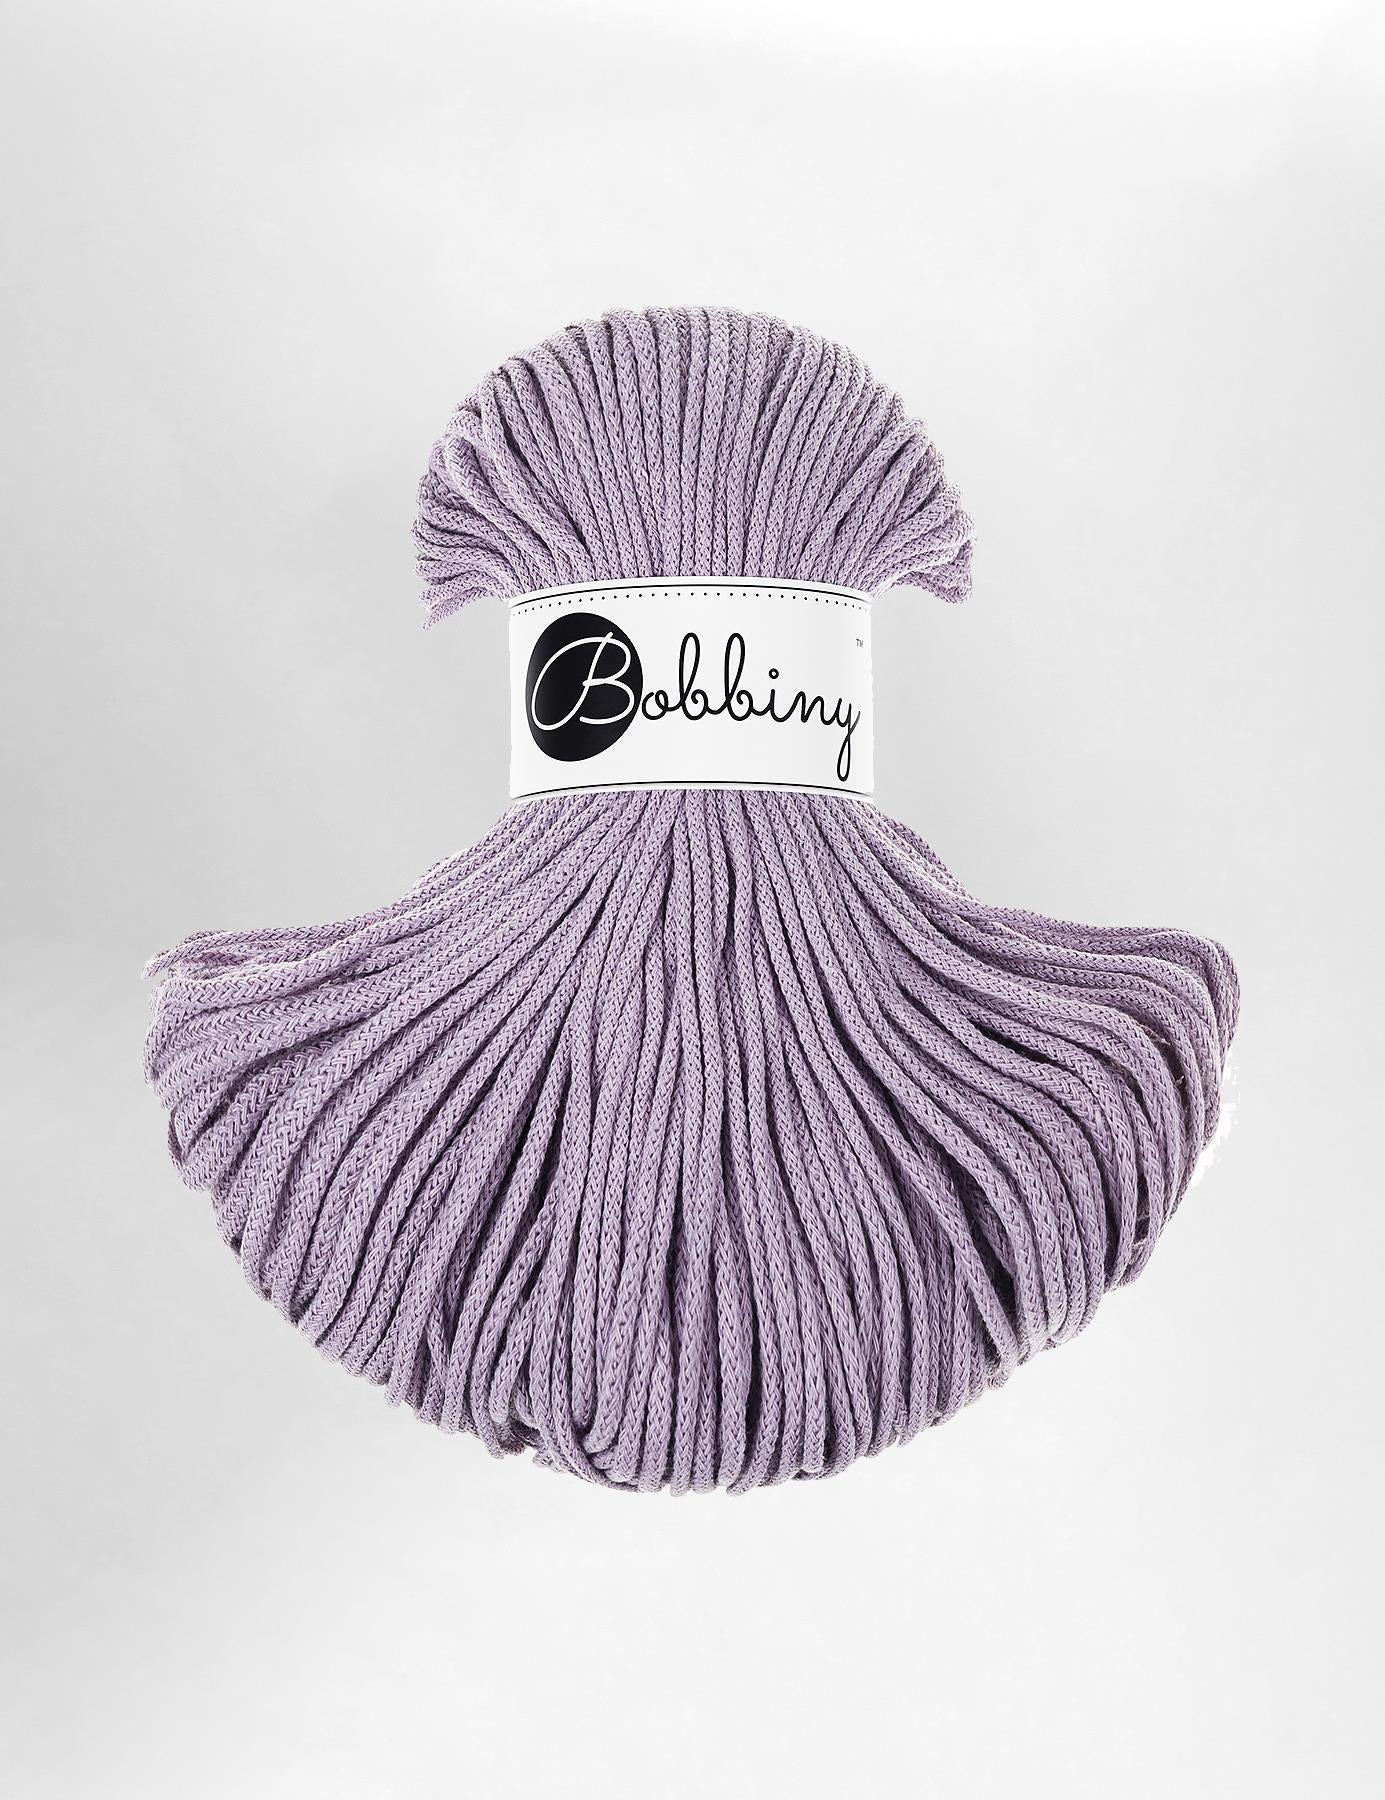 3mm Lavender recycled cotton macrame cord by Bobbiny (100m)